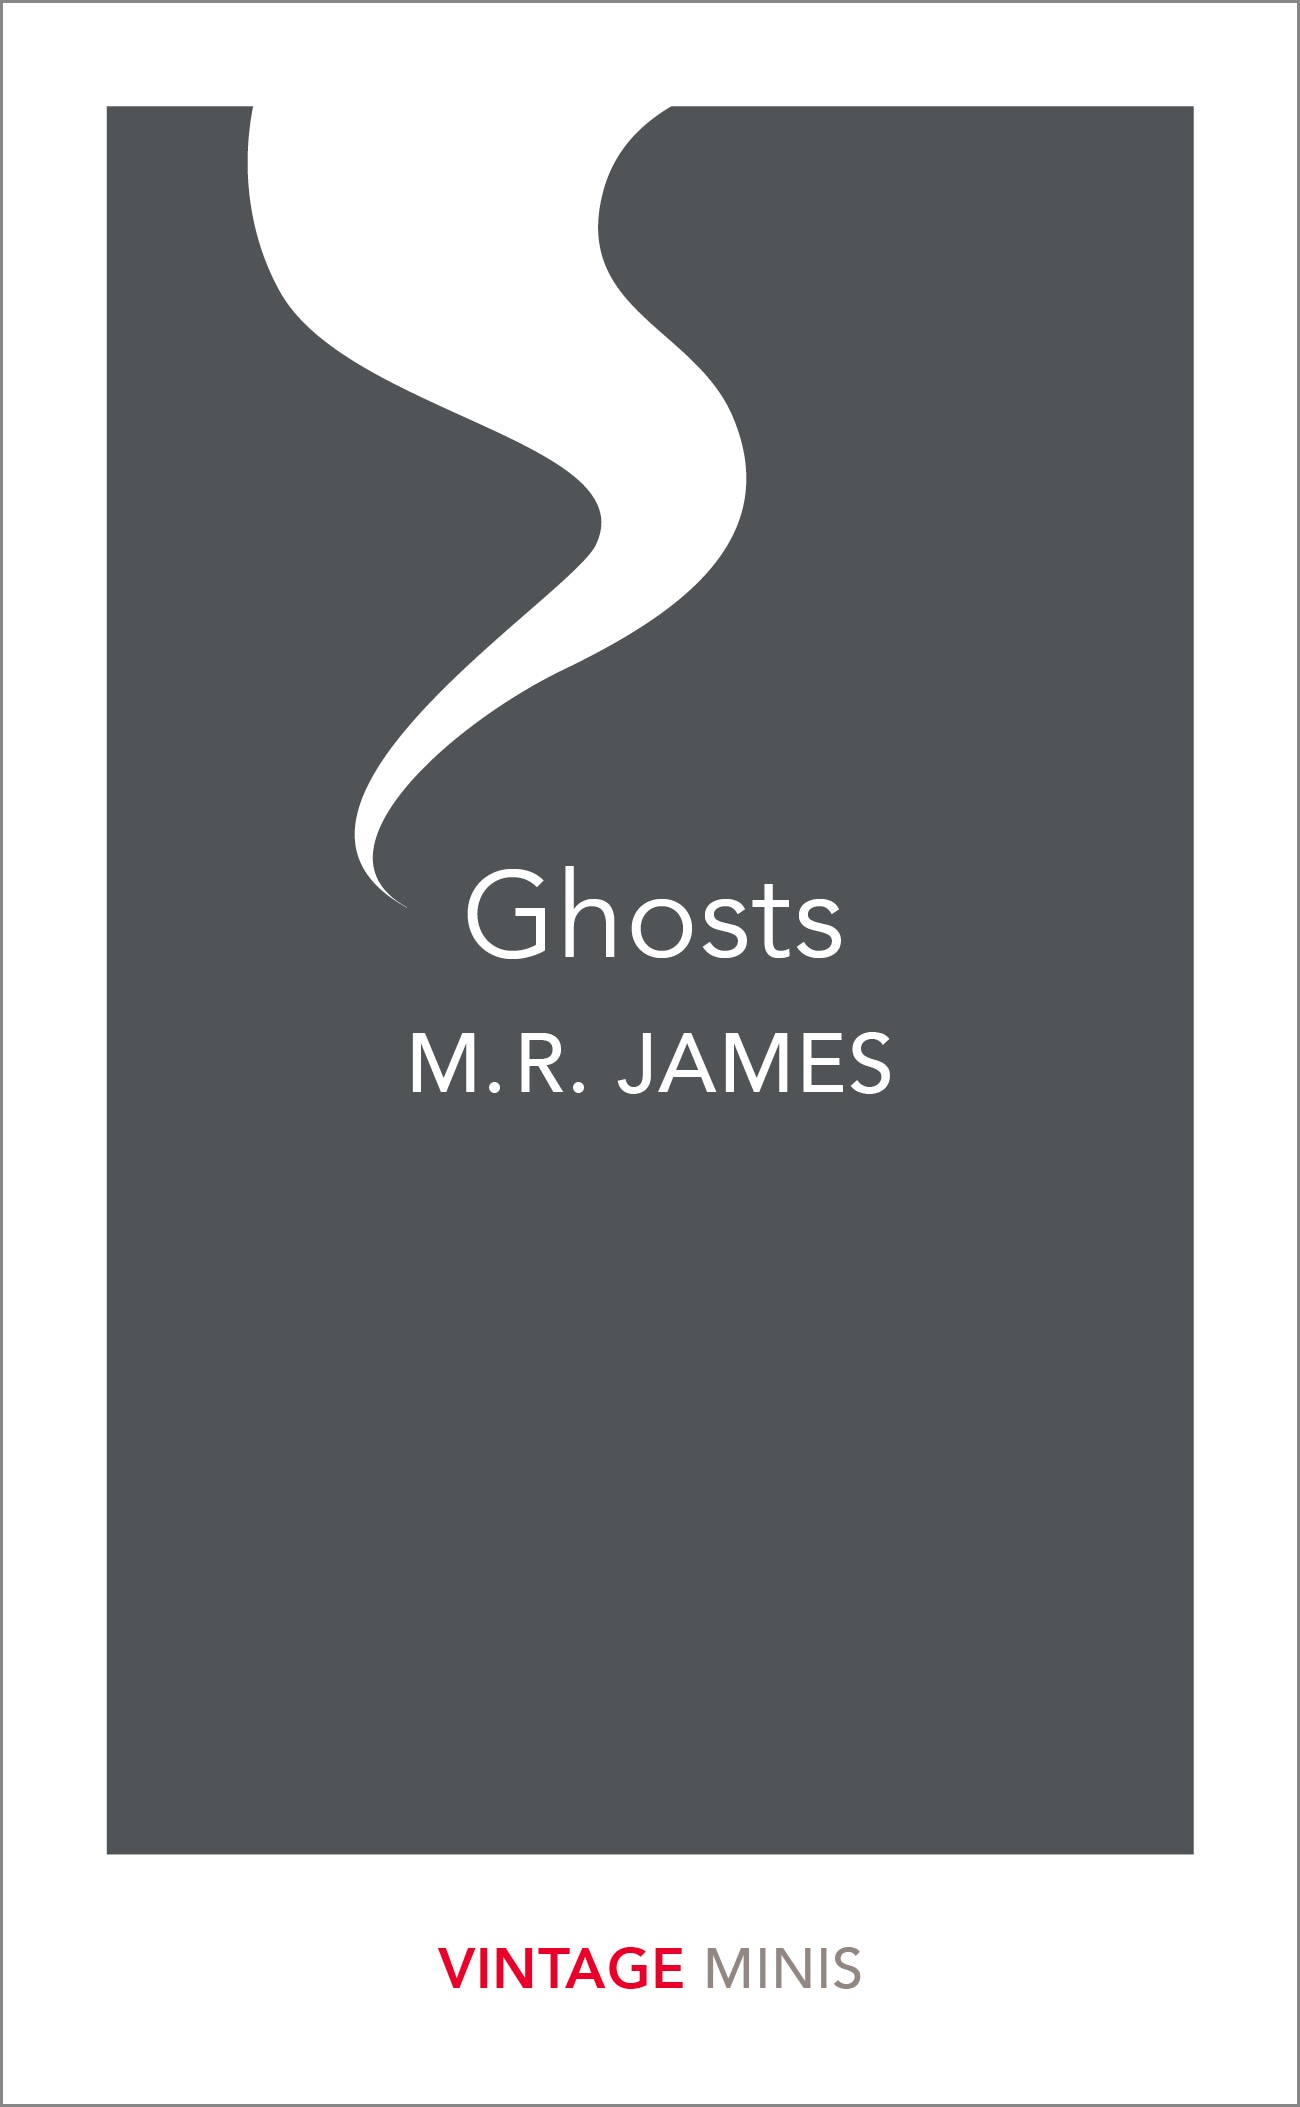 Book “Ghosts” by M. R. James — April 5, 2018